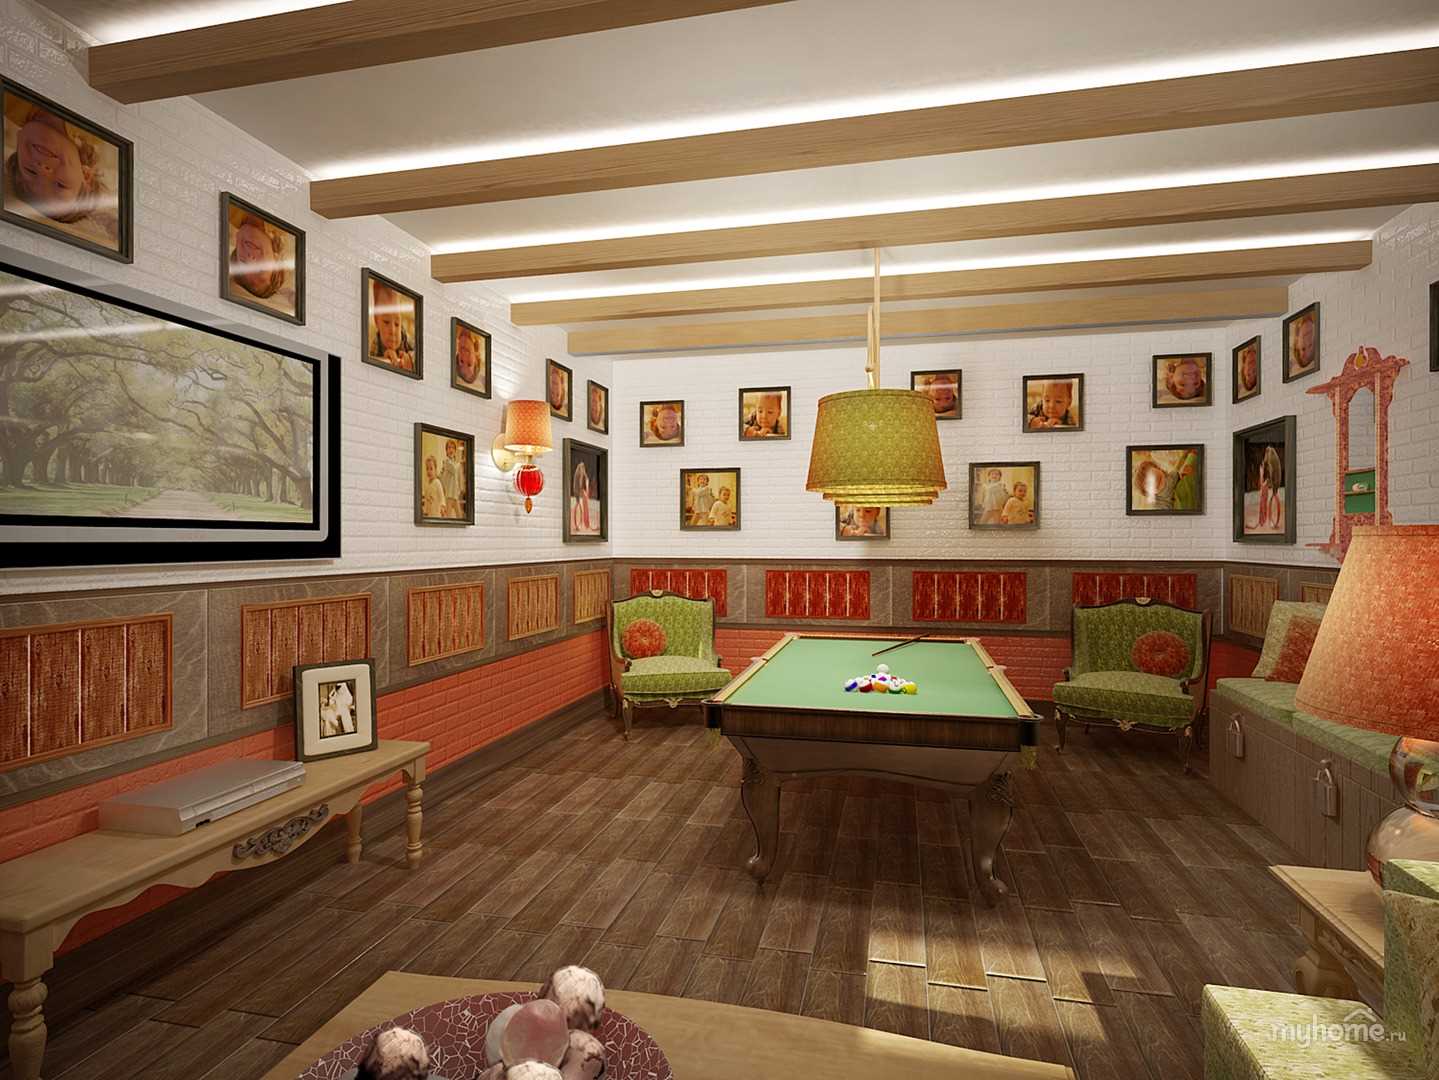 variant of a beautiful style of a billiard room